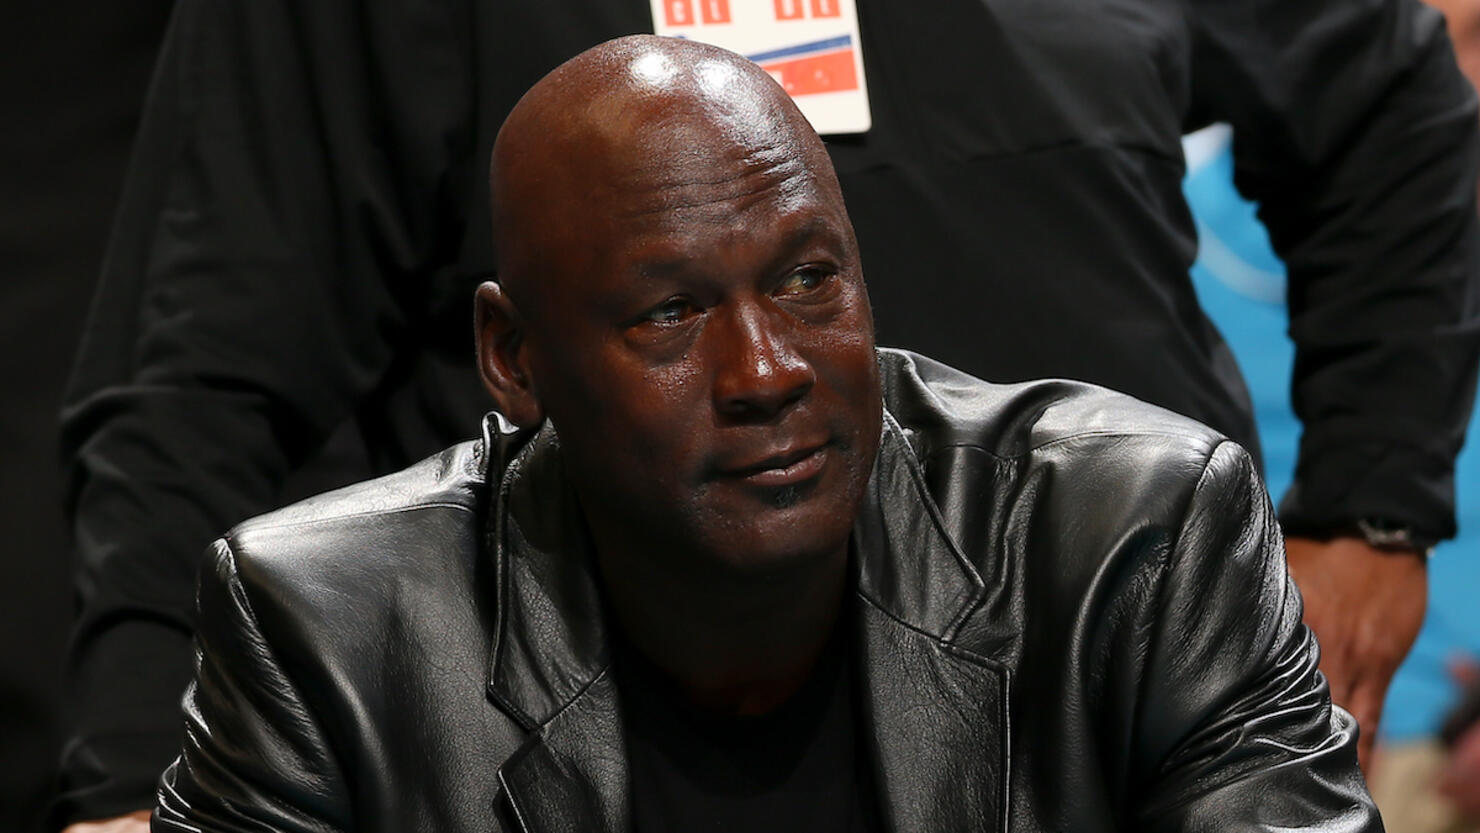 Michael Jordan in talks to sell majority stake in Hornets, sources